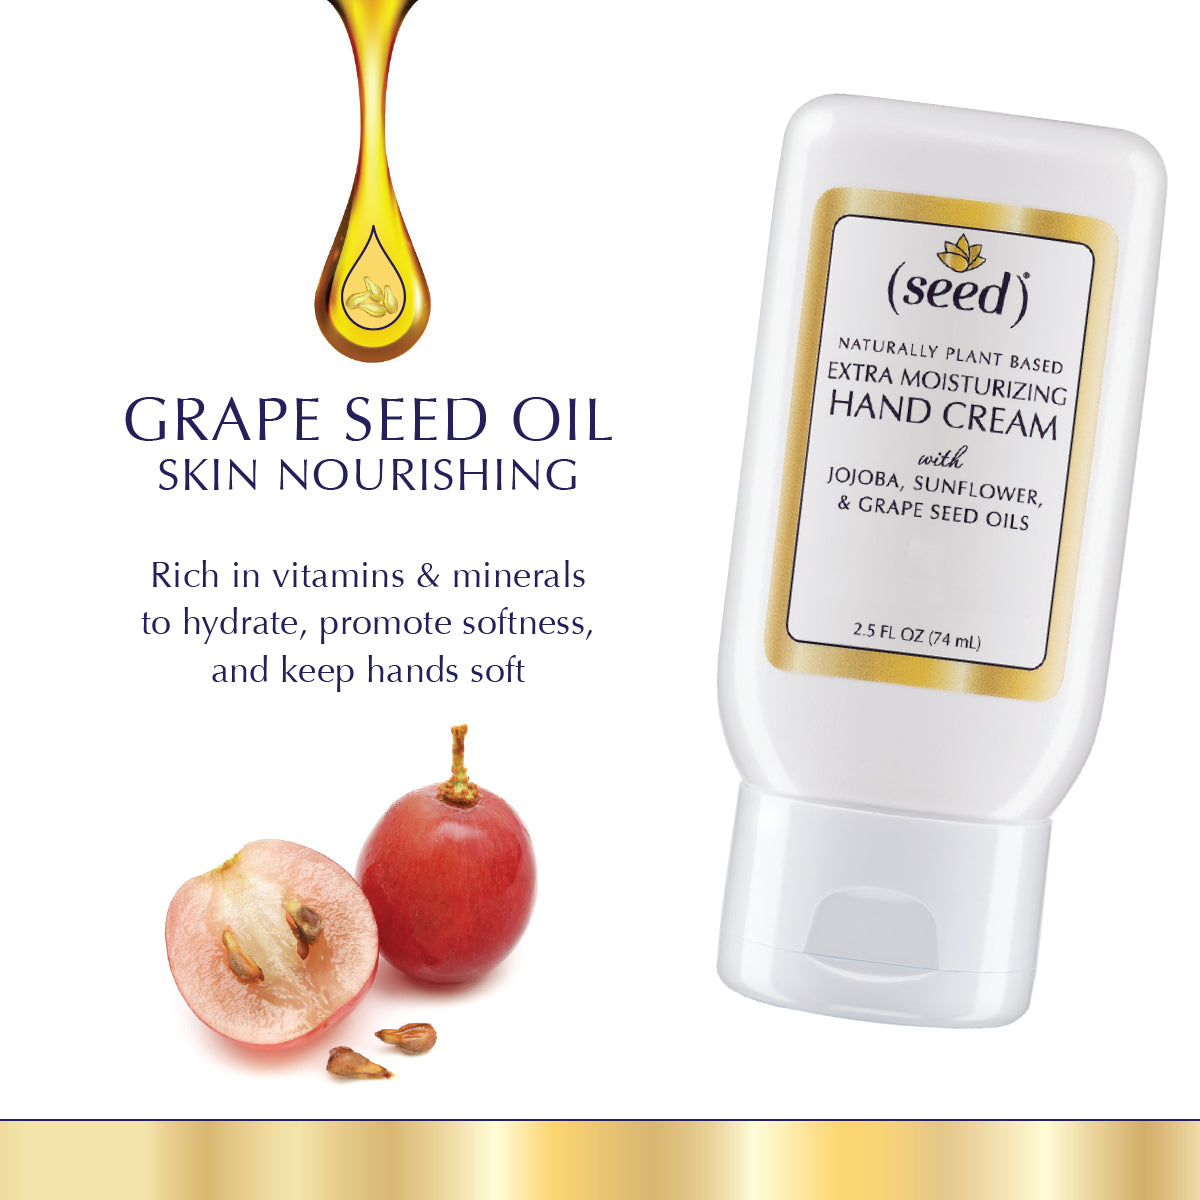 Seed Extra Moisturizing Hand Cream features grape seed oil 